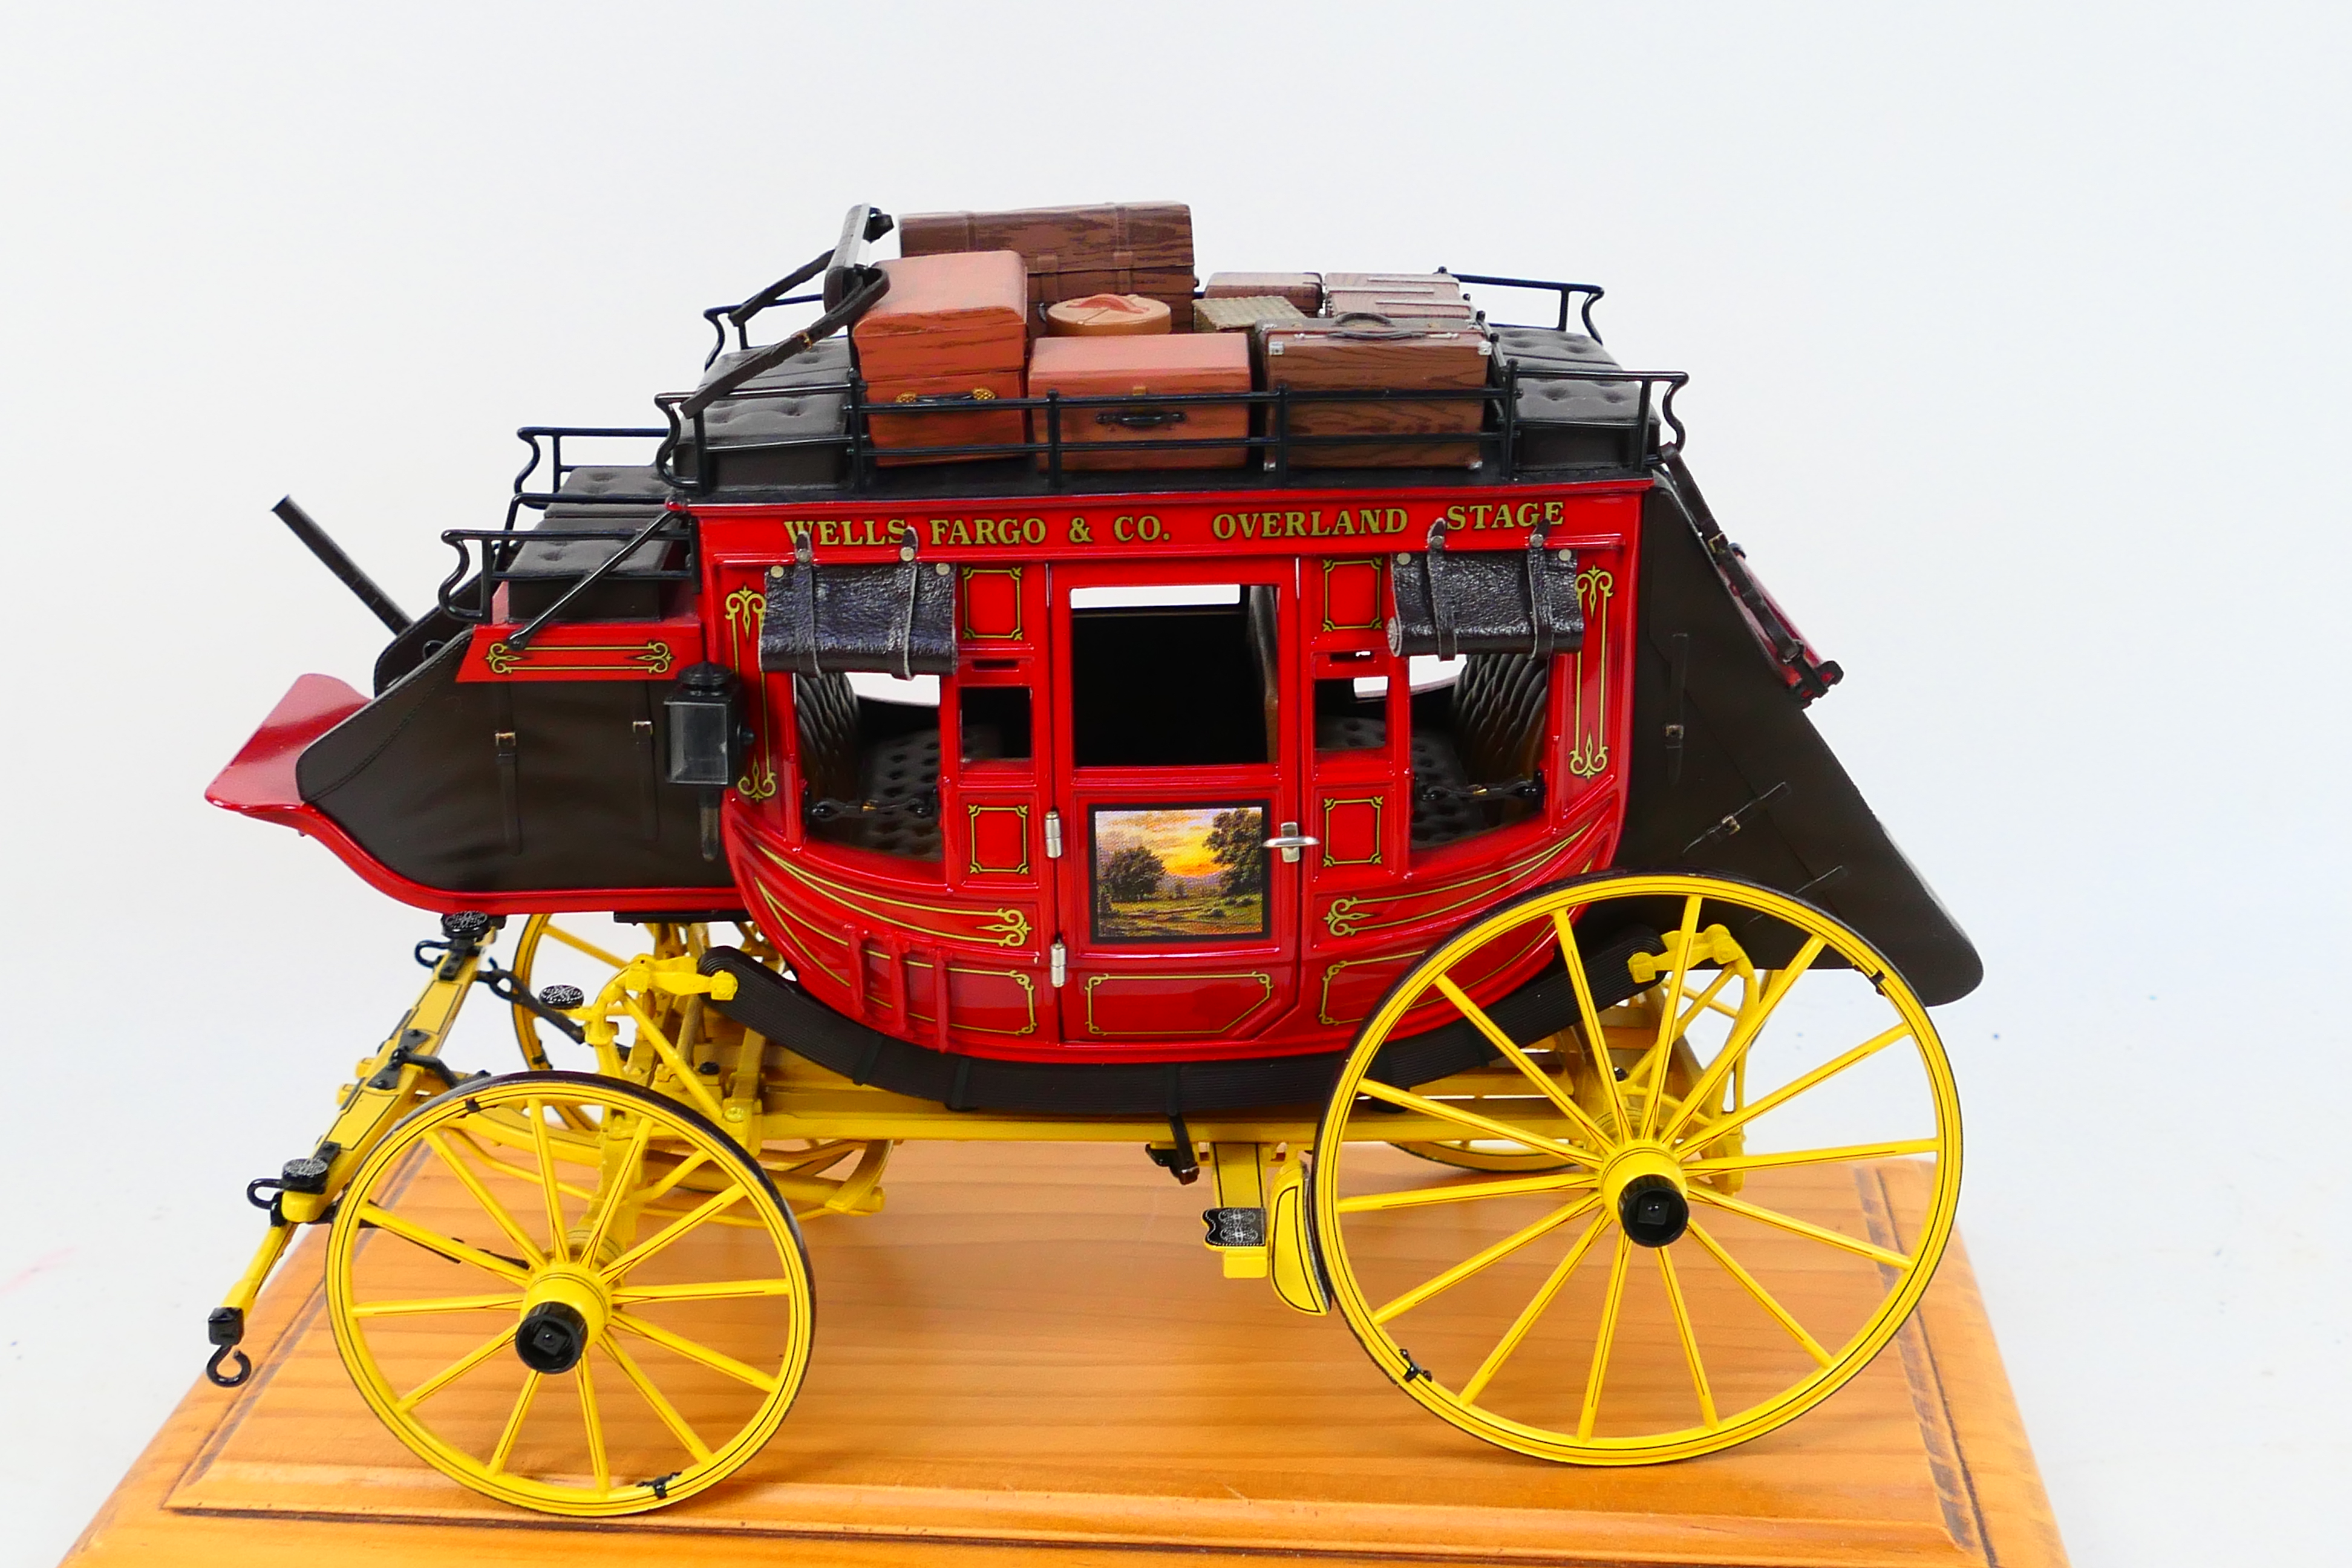 Franklin Mint - A Franklin Mint 1:16 scale Wells Fargo Overland Stagecoach. - Image 5 of 9